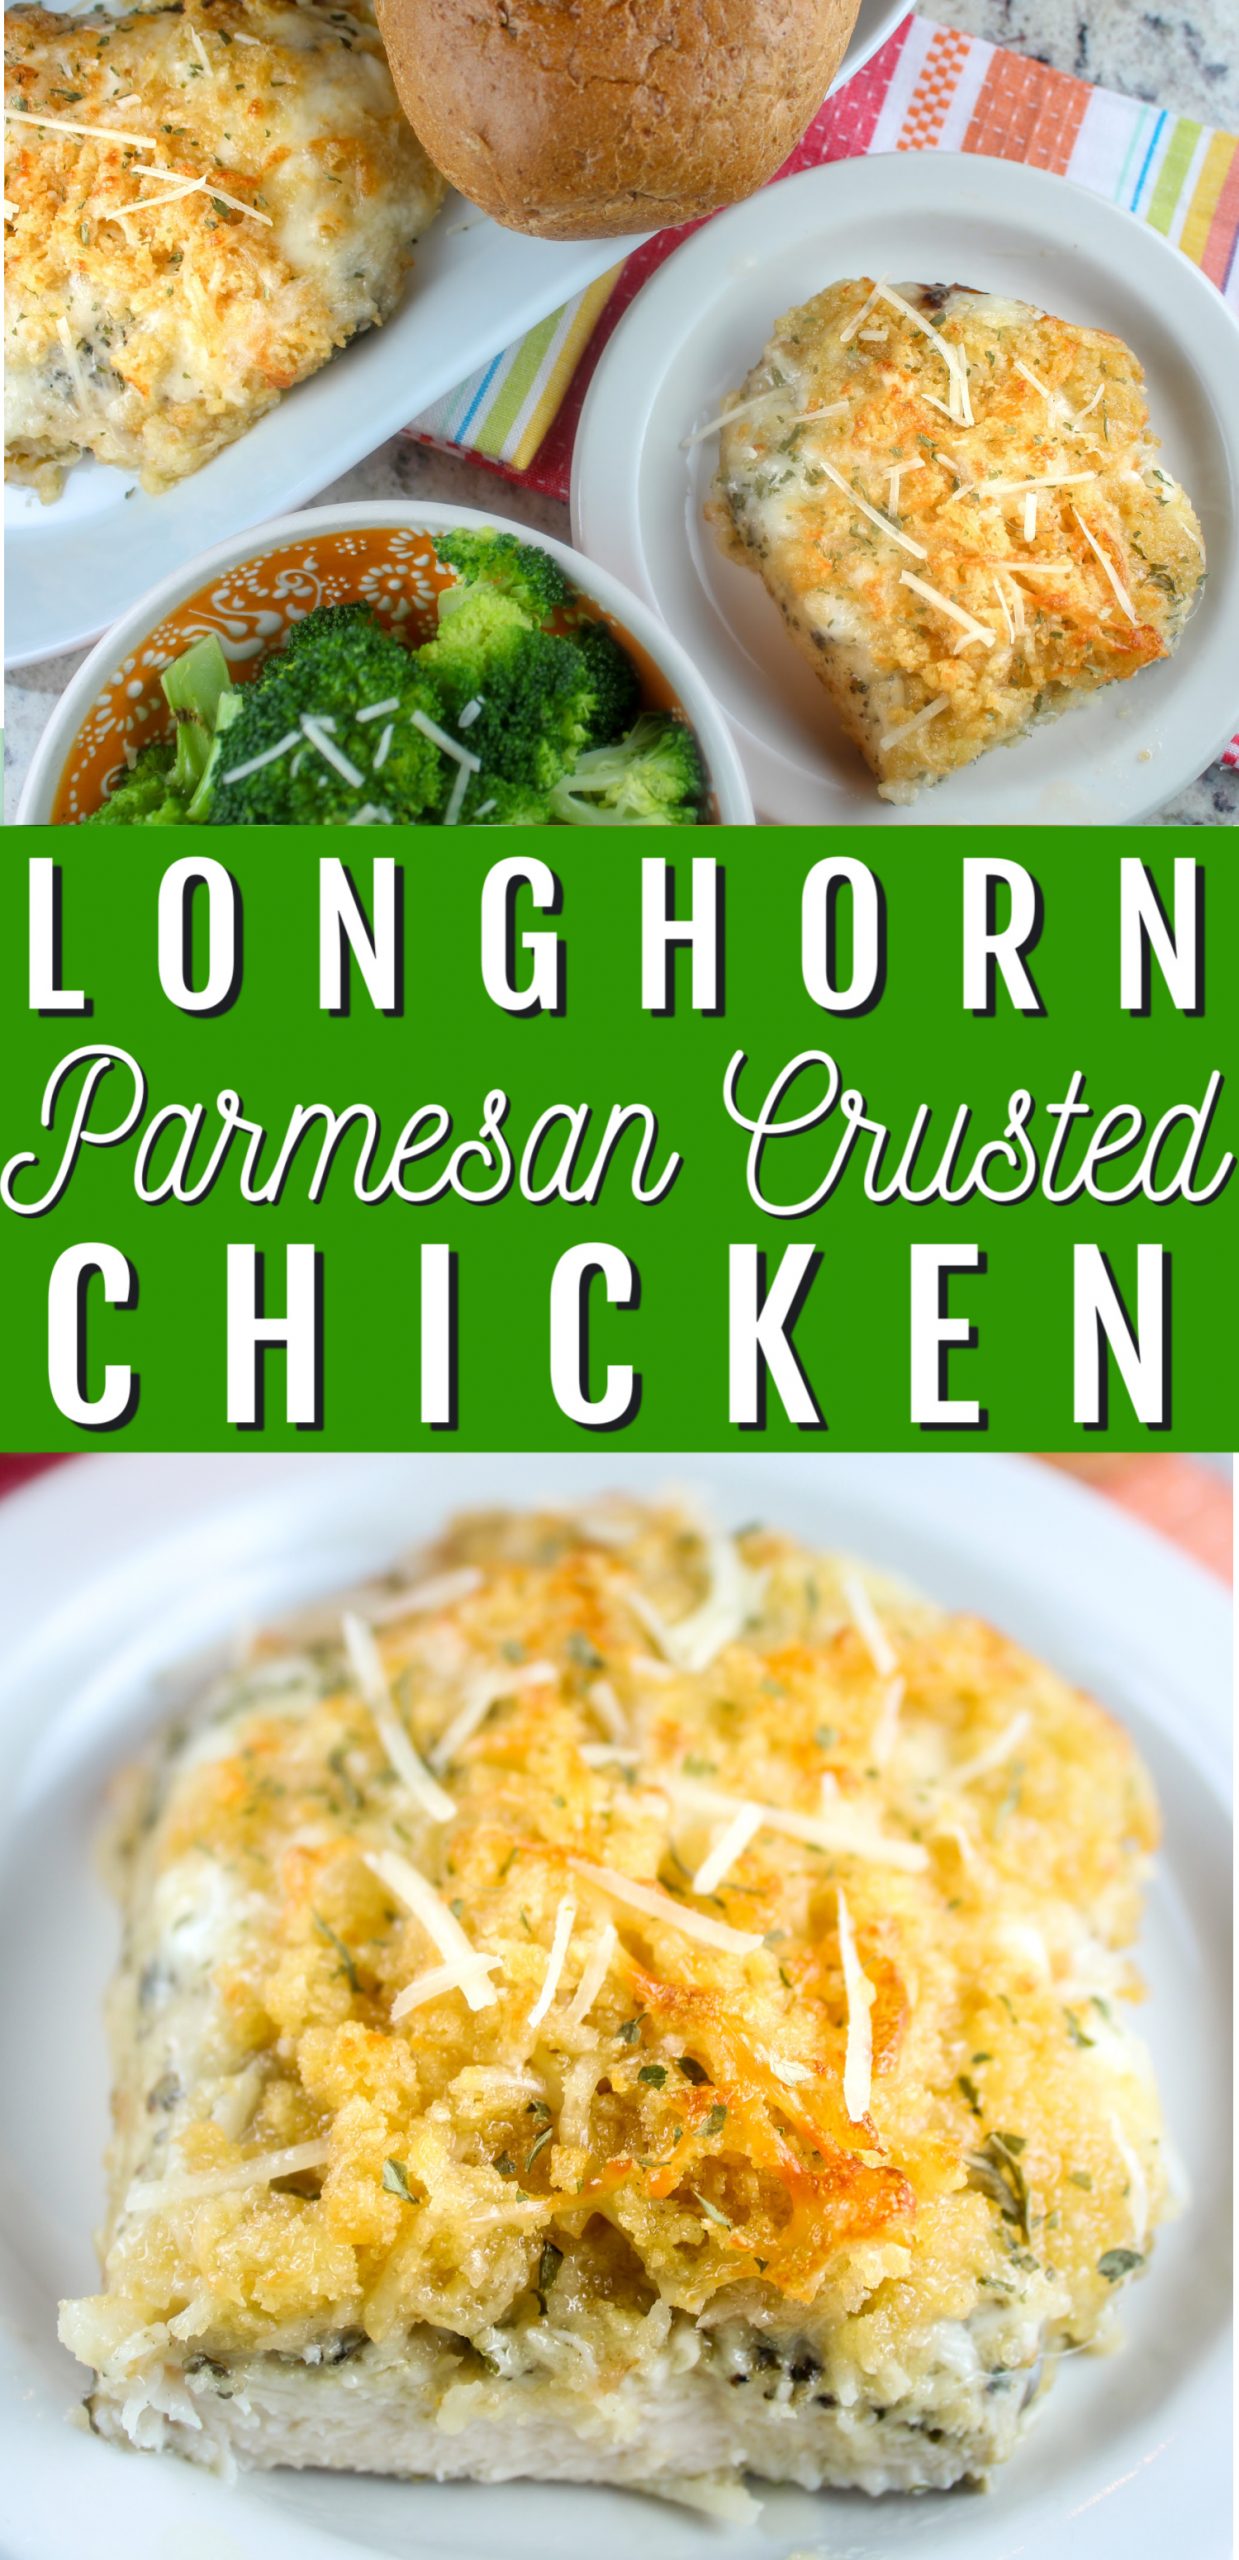 Fresh, juicy, grilled chicken becomes irresistible when it's topped with a creamy, crunchy Parmesan and garlic cheese crust. This is definitely DROOL-WORTHY!  via @foodhussy